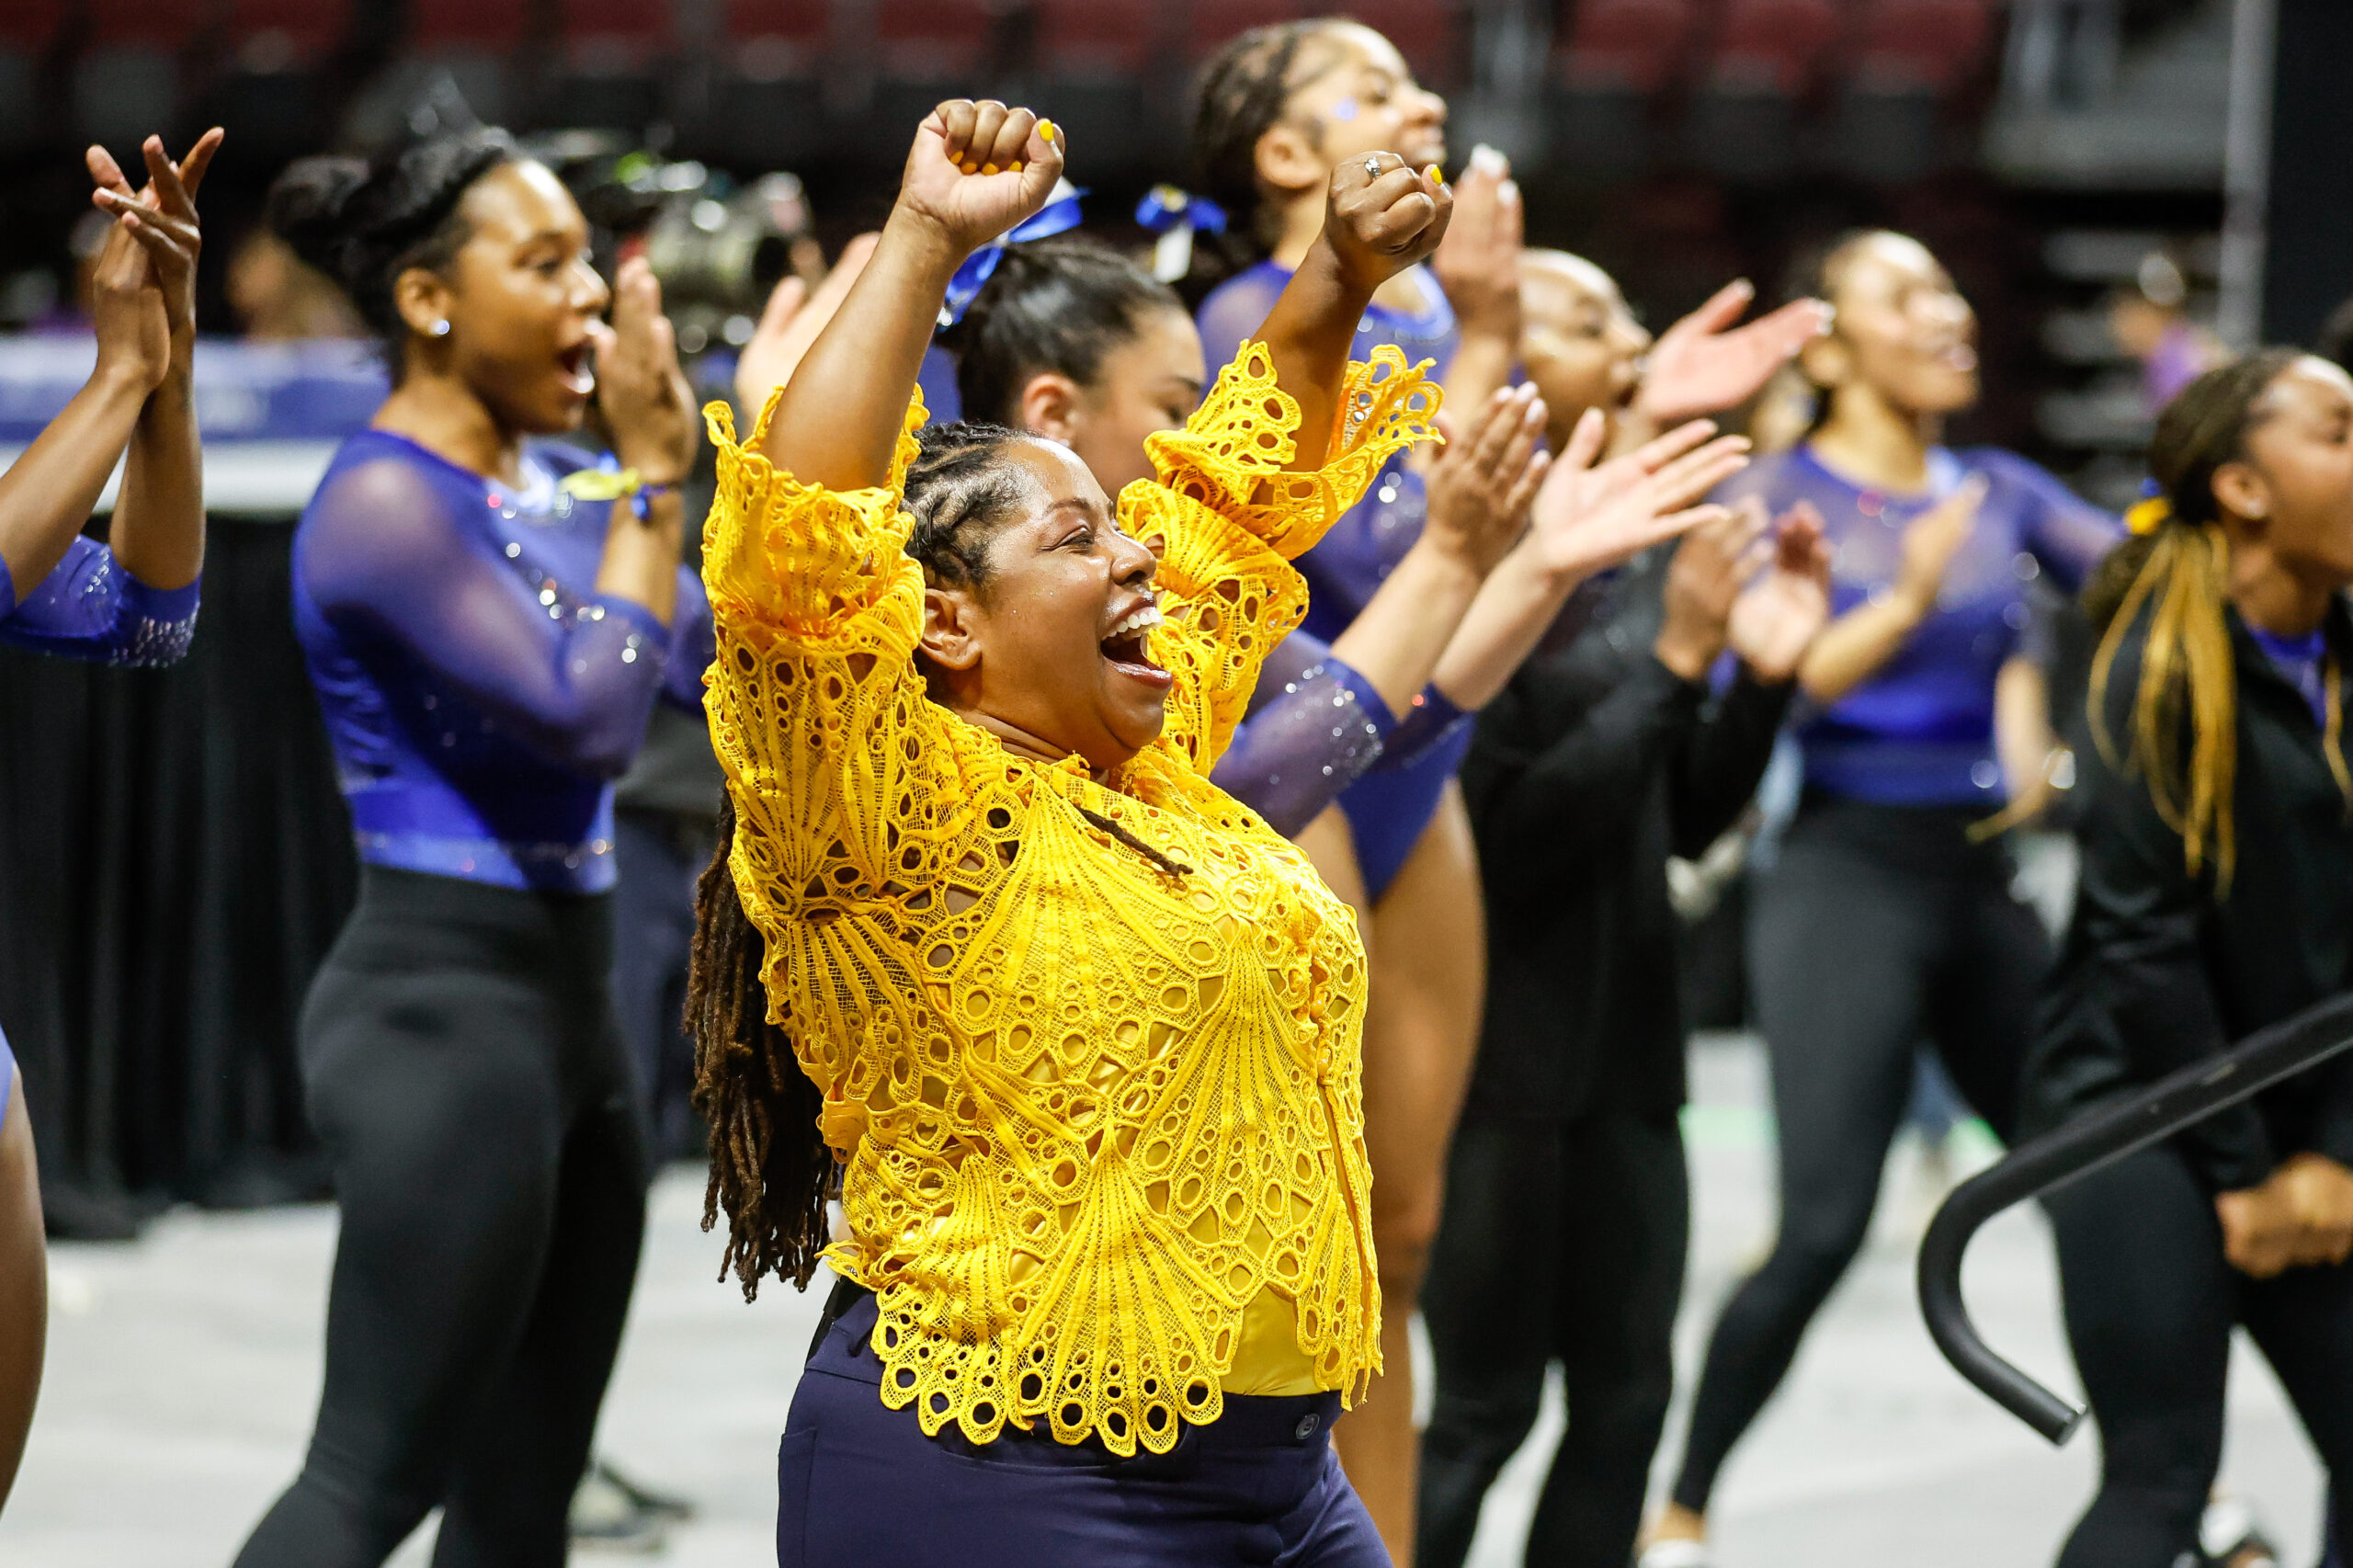 Fisk Gymnastics Team Opens Up About Making History For HBCUs